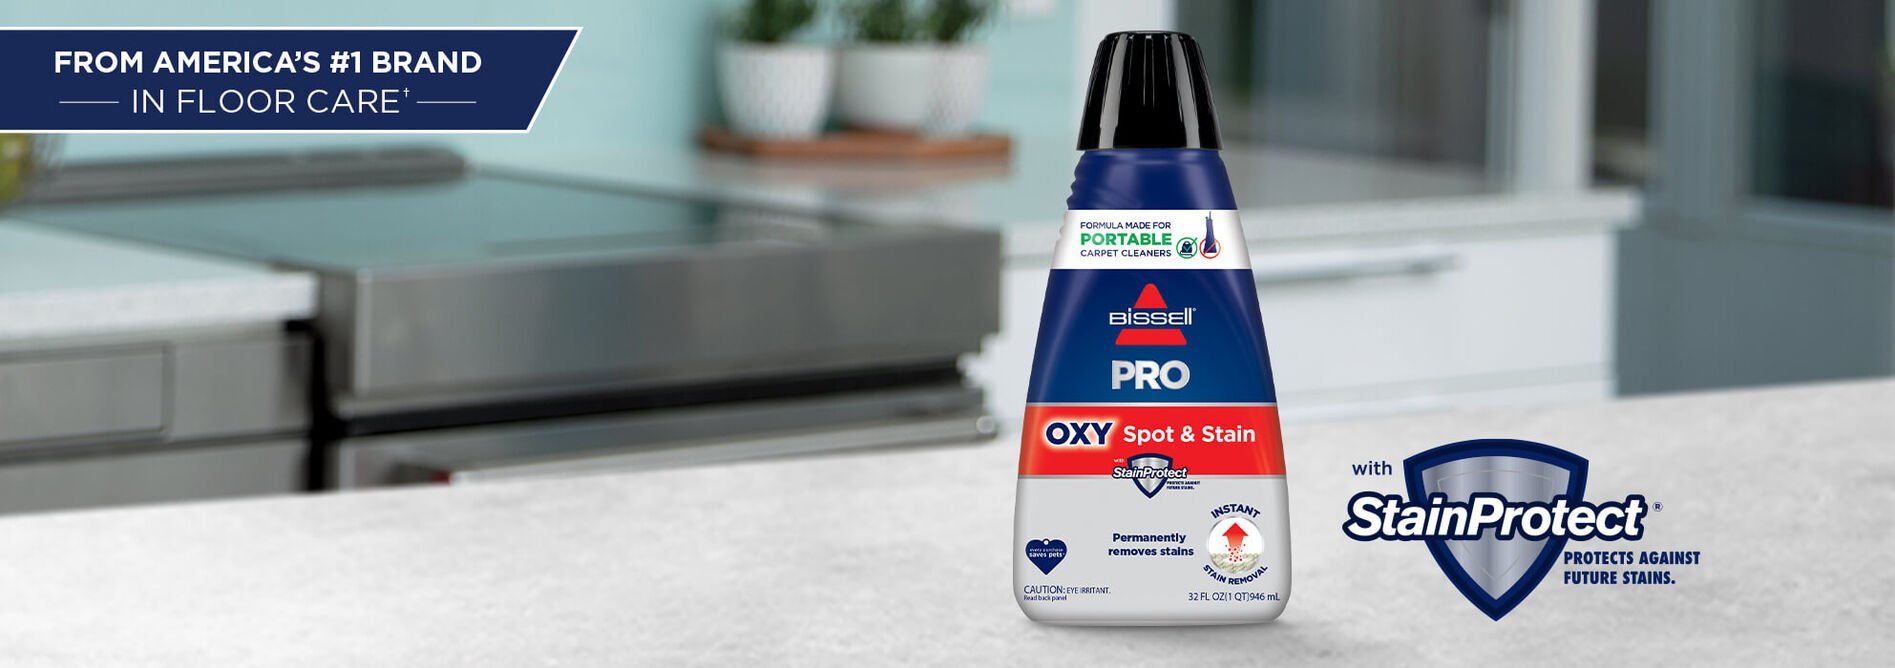 PRO OXY Spot & Stain with StainProtect® Formula 2038